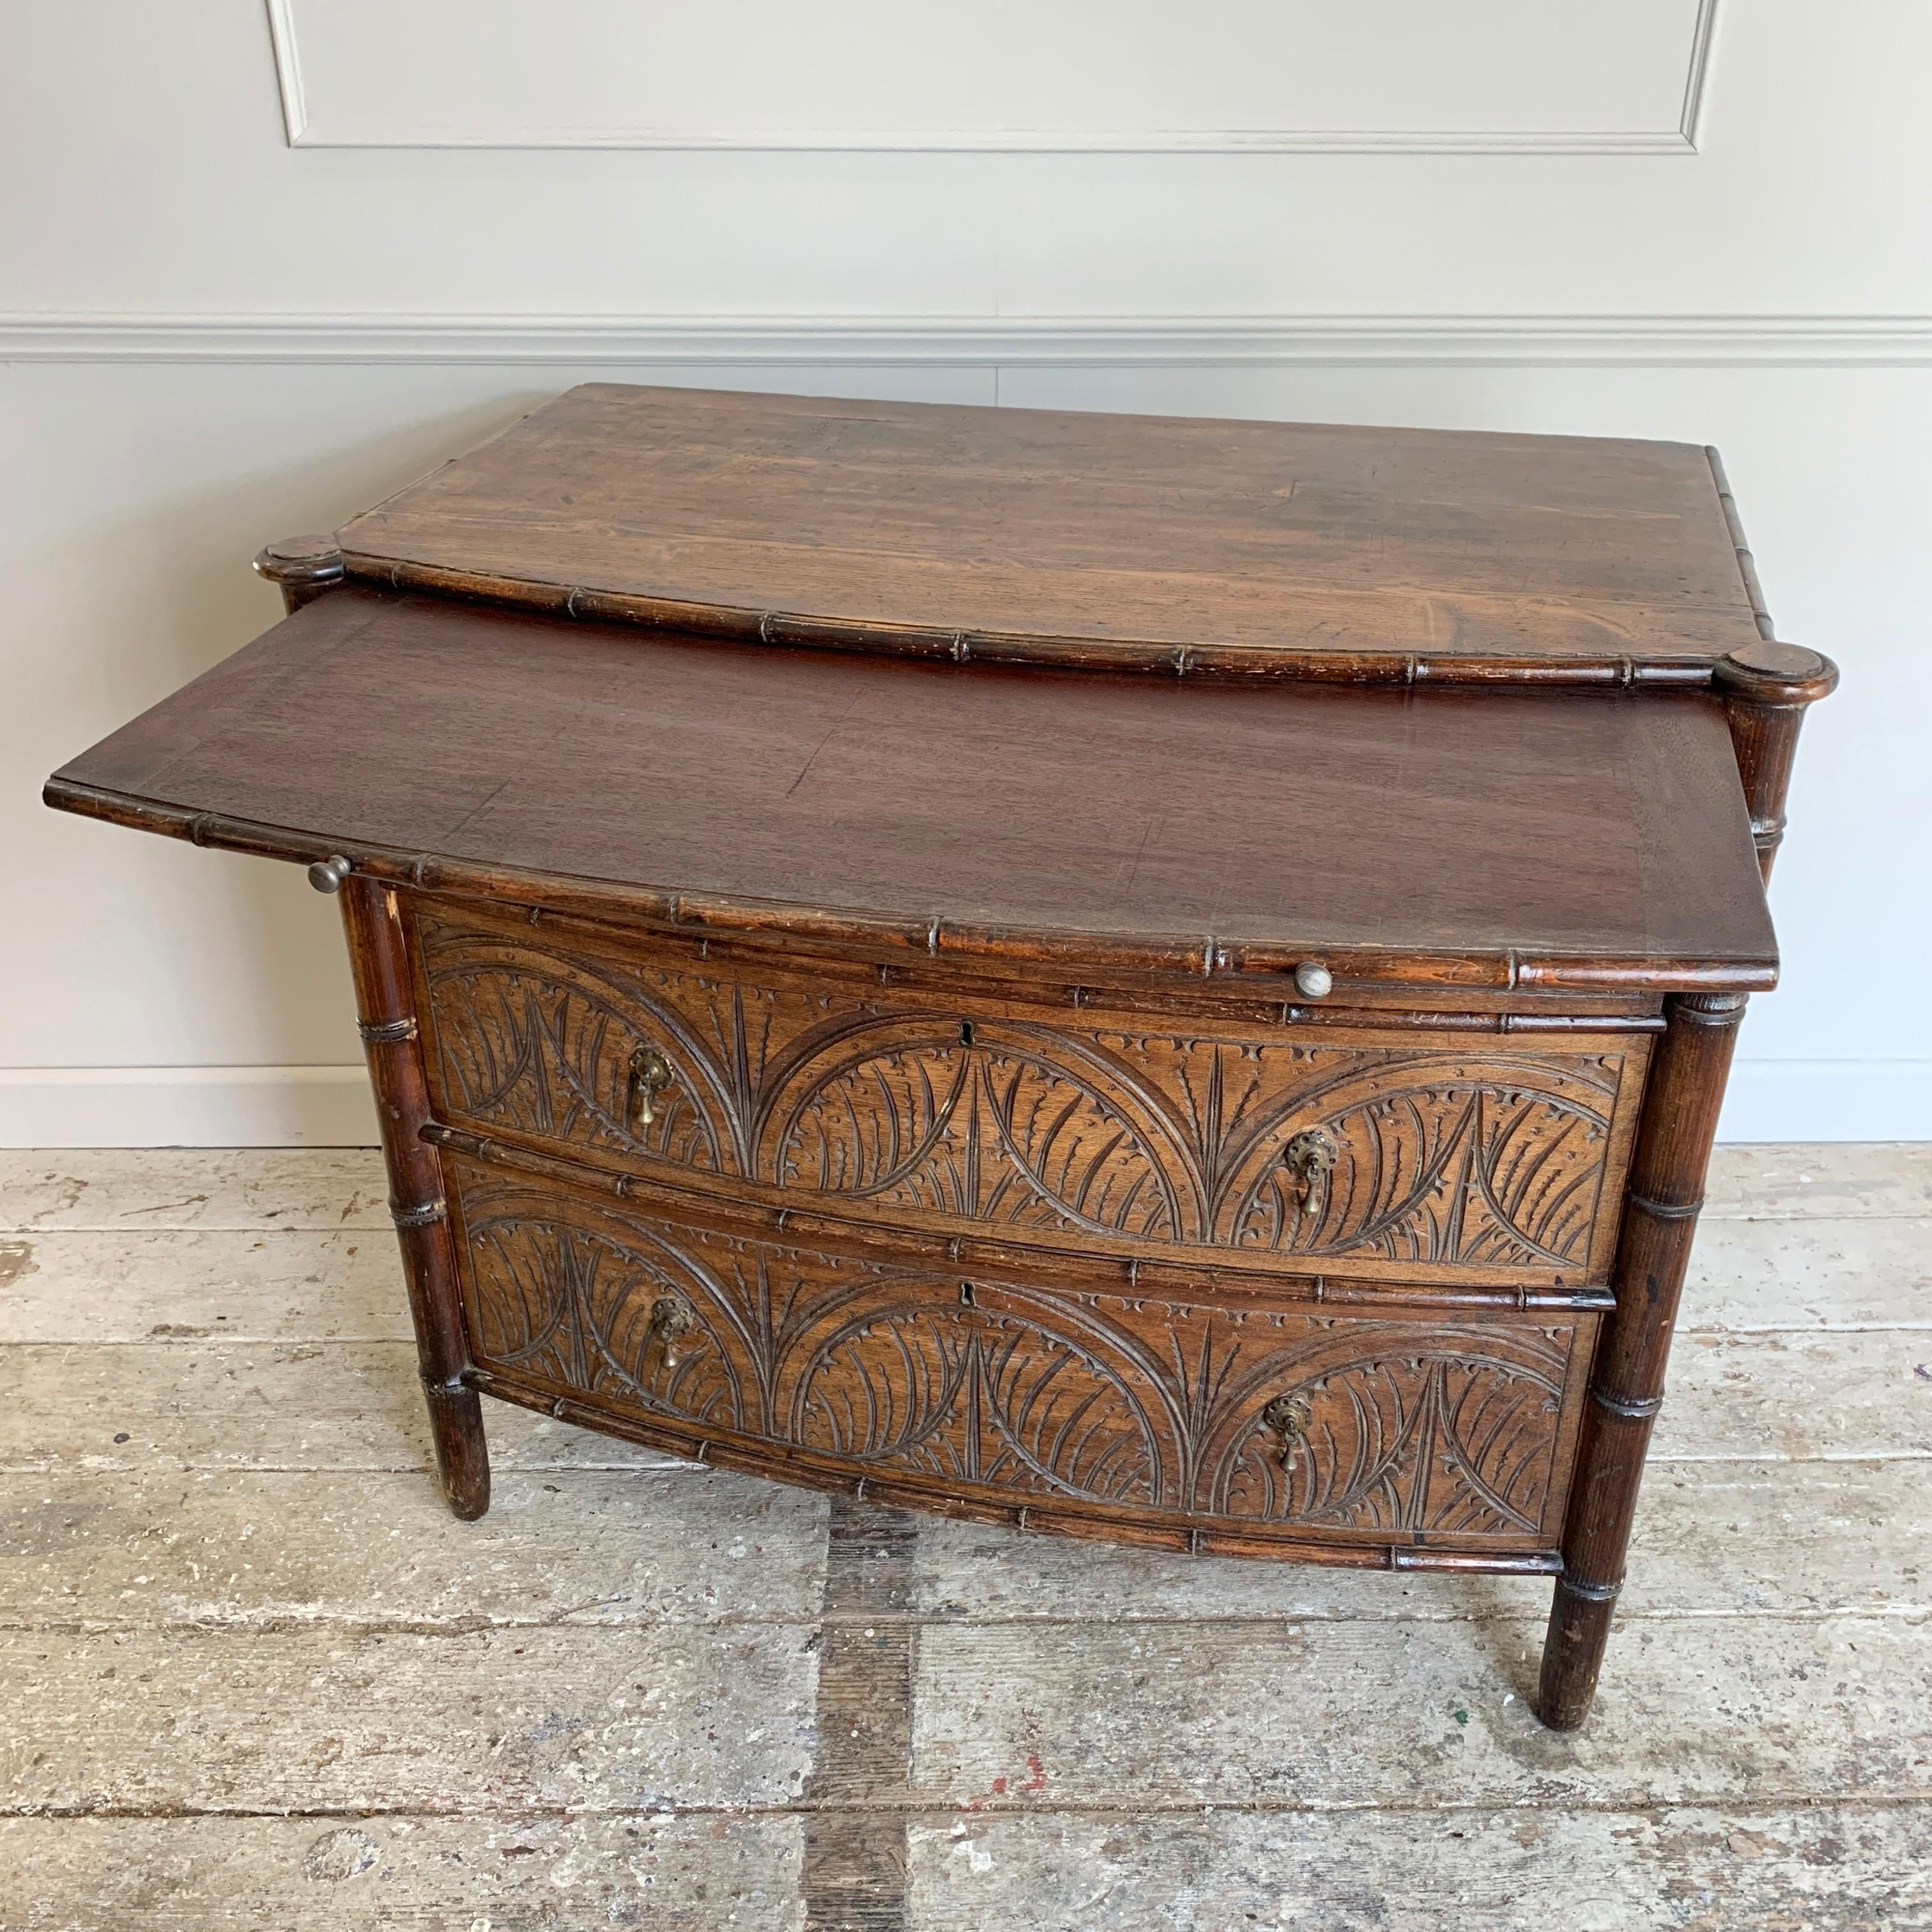 Faux bamboo late Victorian secrétaire, chest of drawers
Fabulous late Victorian hand carved secrétaire
There is a hidden pullout / pull-out writing desk at the top, with 3 good size drawers beneath
The faux bamboo design is used on the legs and